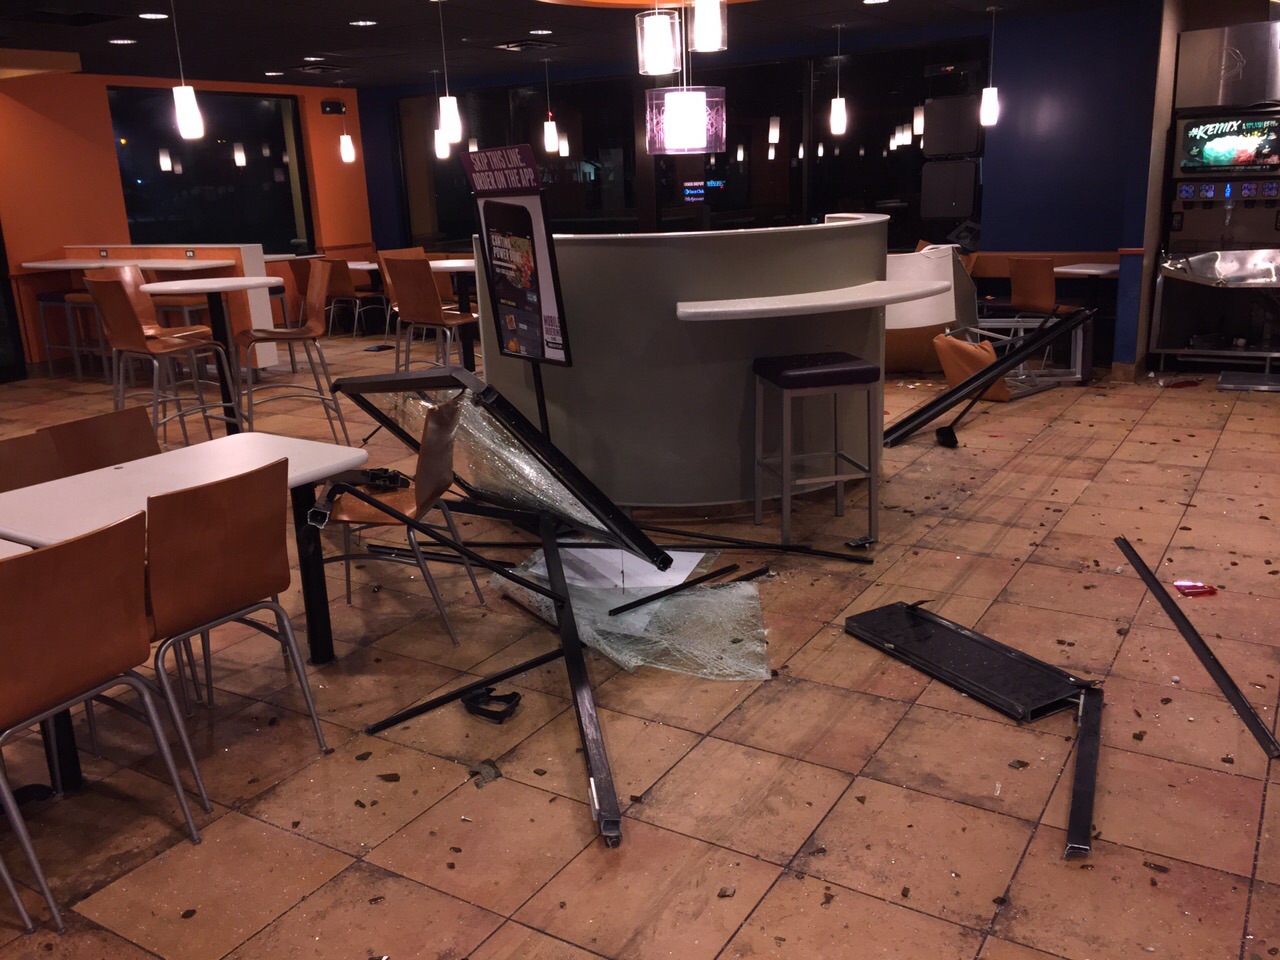 A car slammed into a Coral Springs Taco Bell overnight on February 28, 2015. (Courtesy: Coral Springs Fire Department)